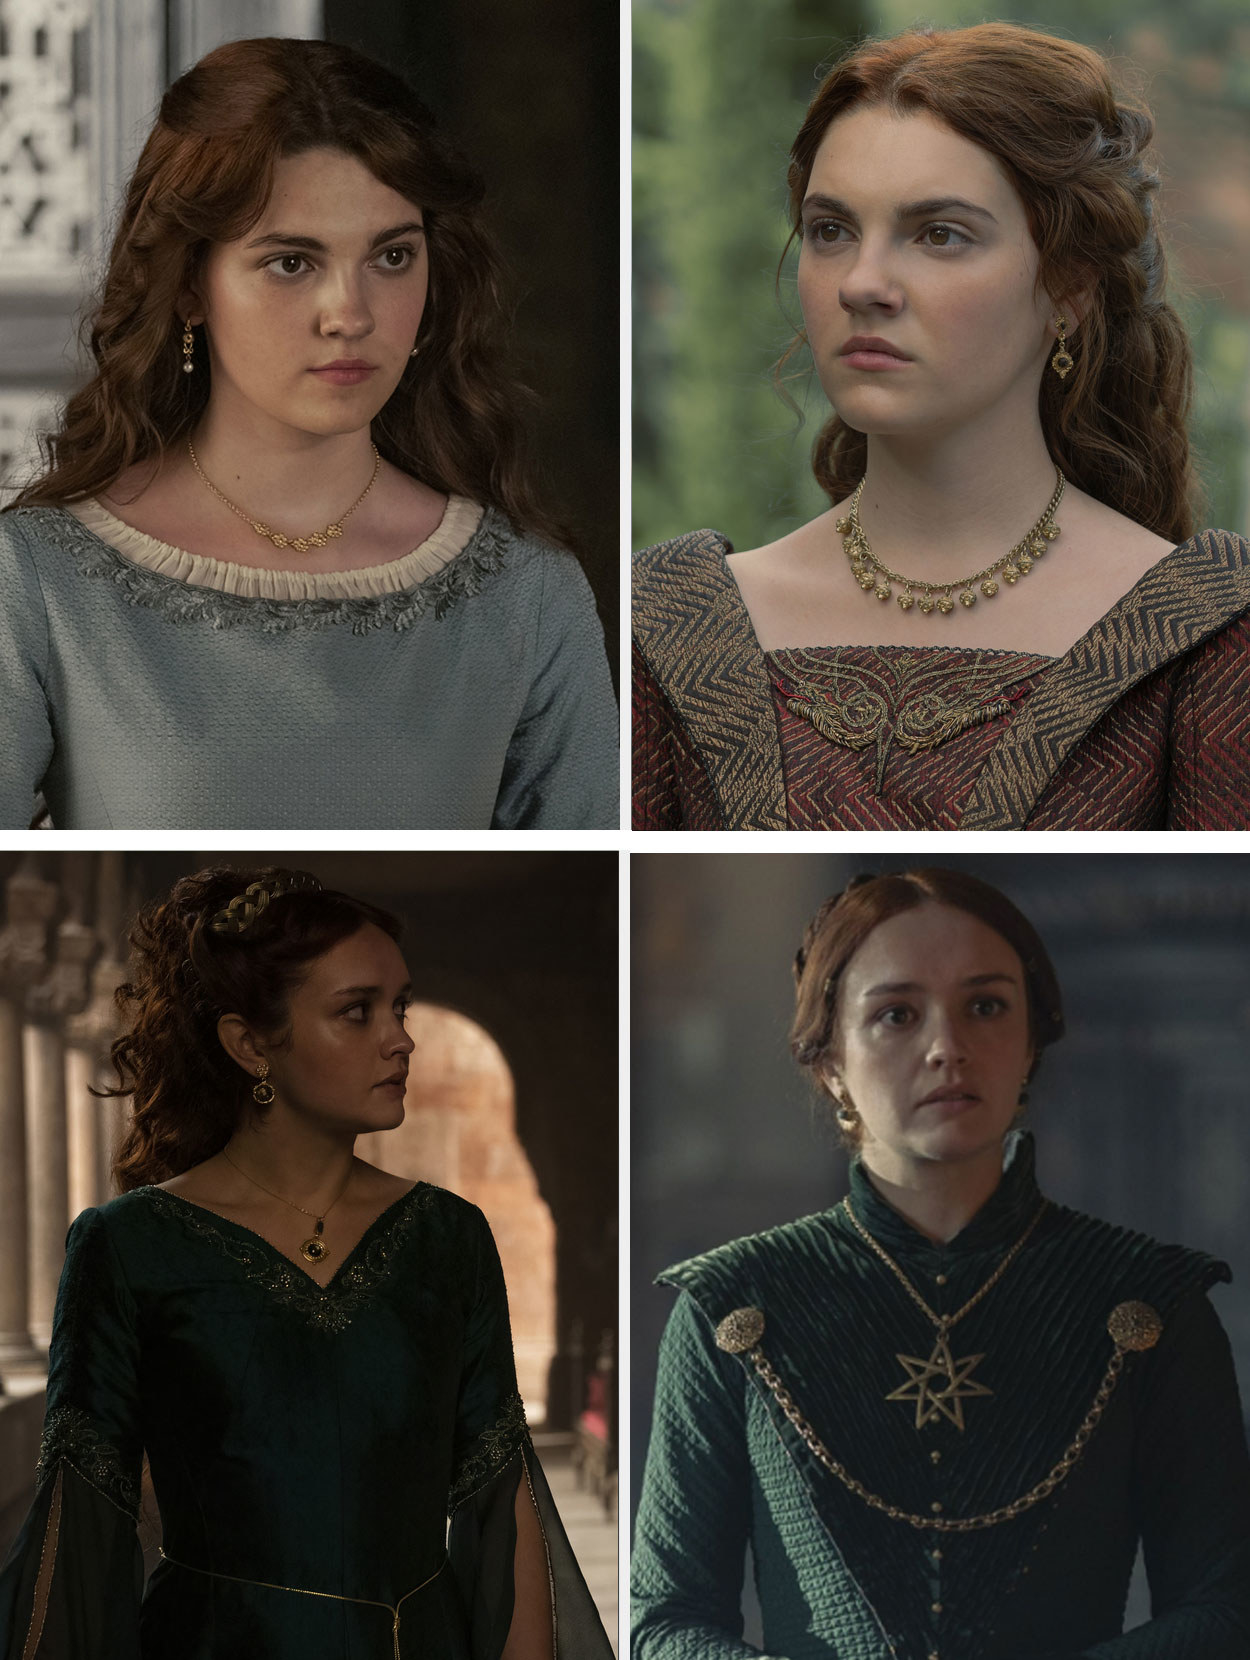 Alicent as played by Emily Carey and Olivia Cooke at four different stages of her life